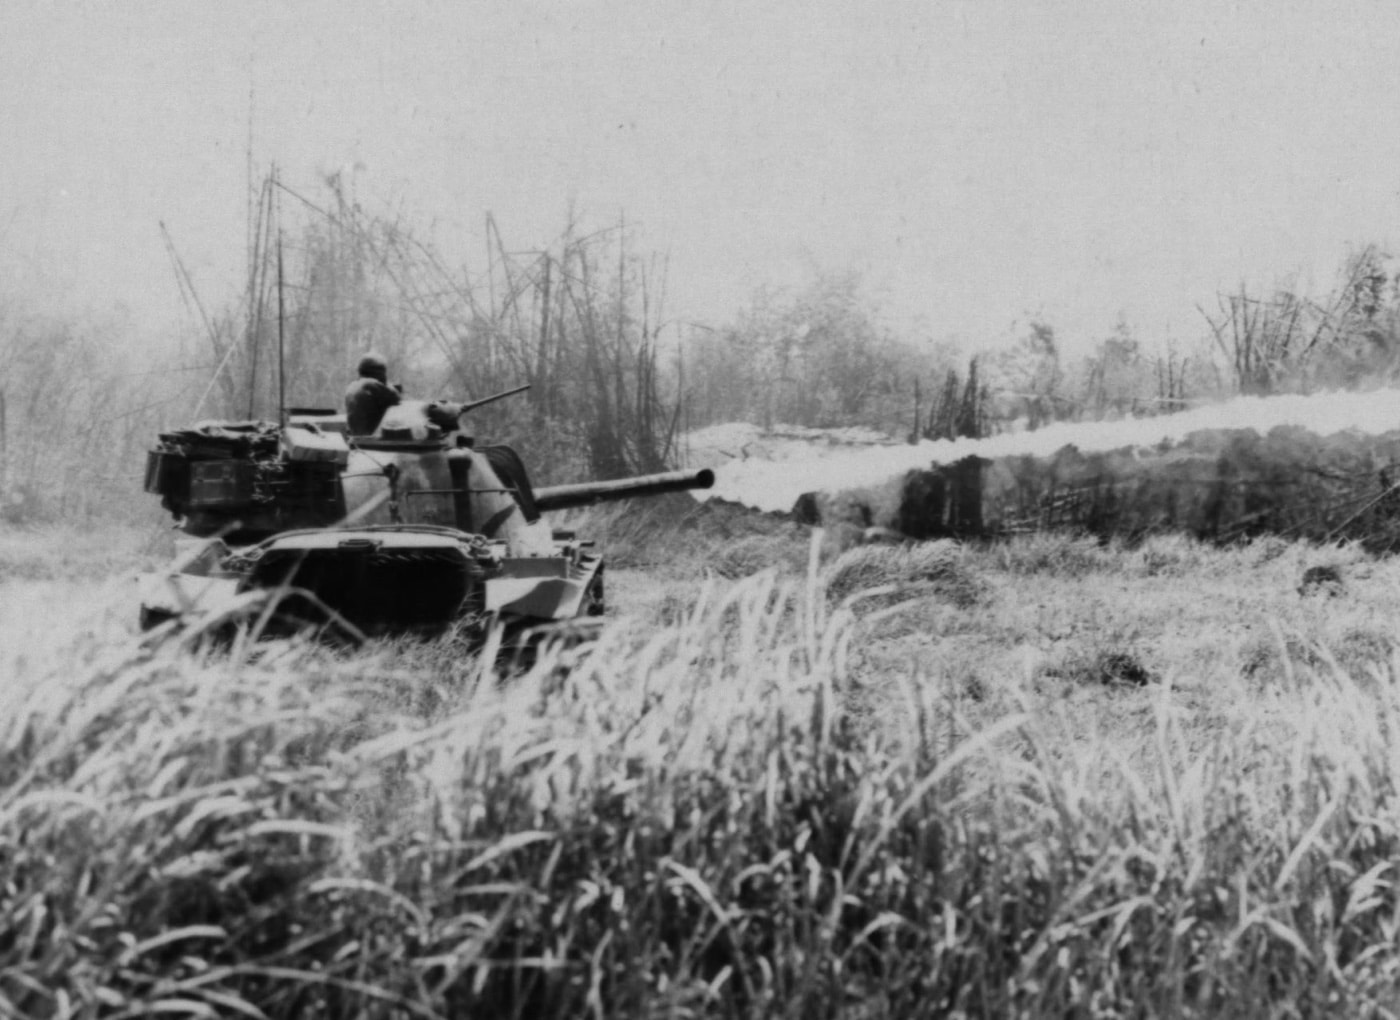 usmc m67 zippo flame tank attacks a vc position in the vietnam war